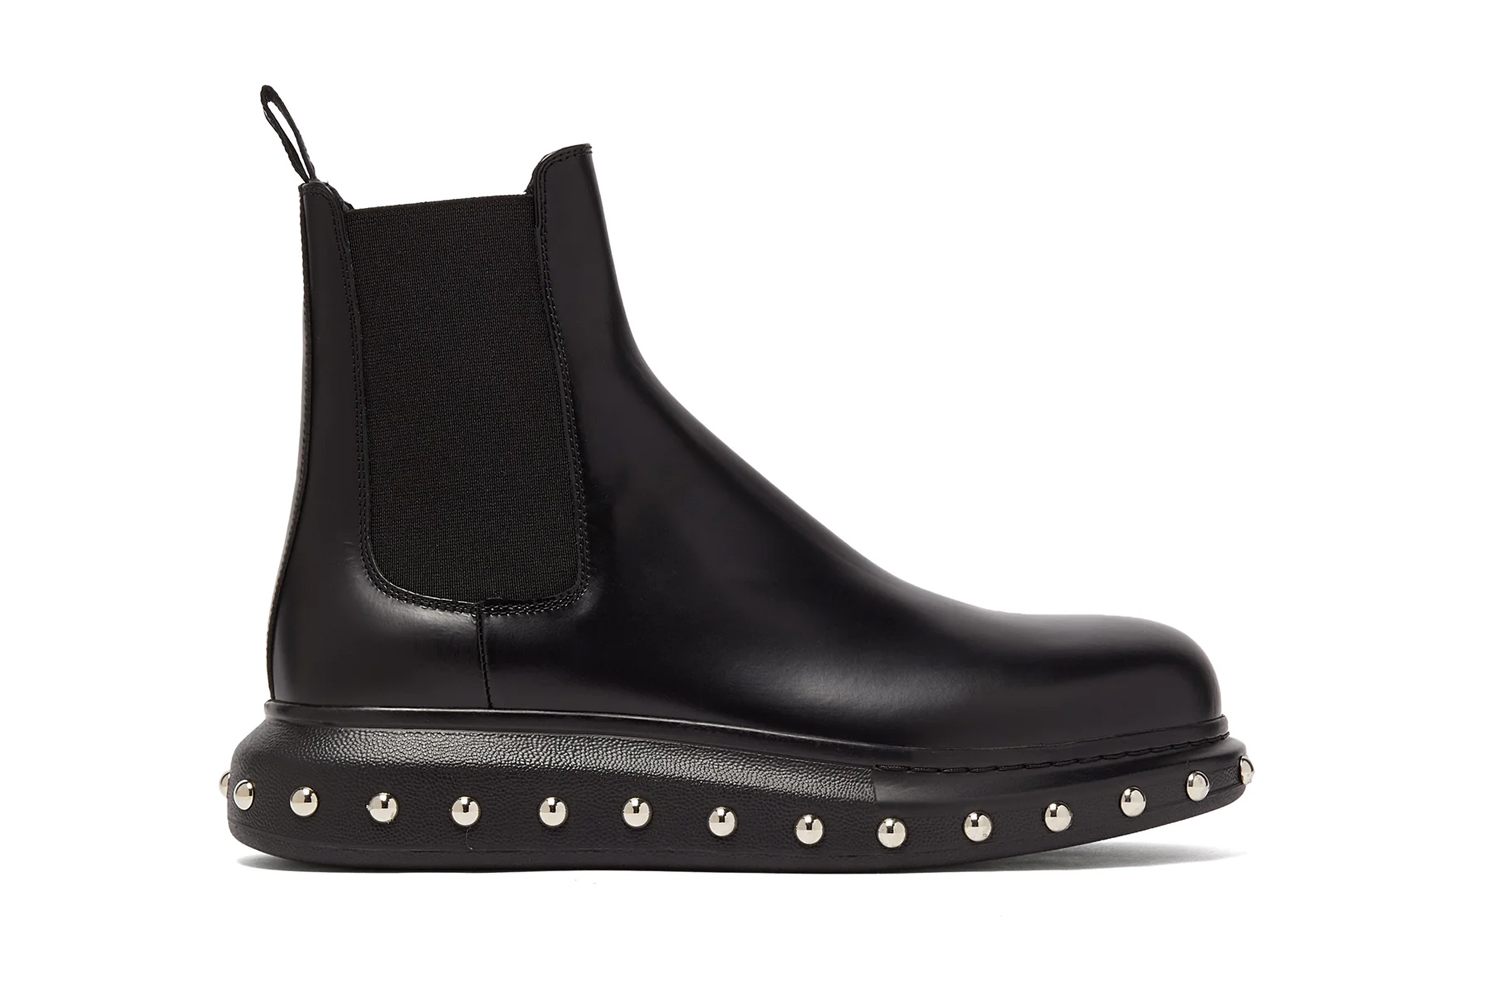 Alexander McQueen Studded Leather Chelsea Boots footwear boots shoes style MCq